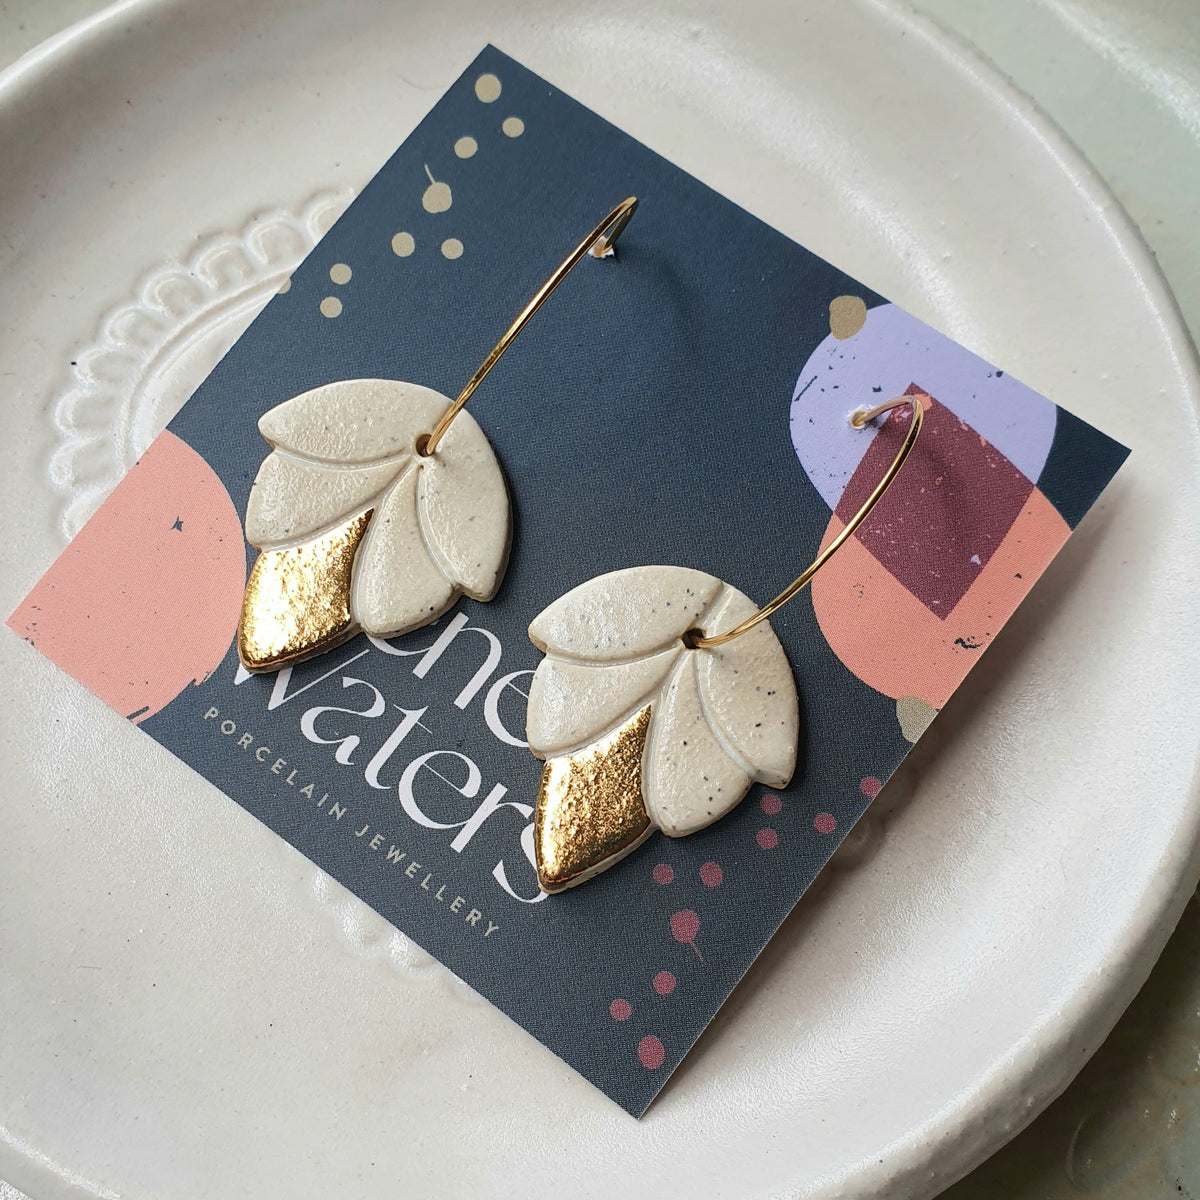 Small lotus bud earrings - natural clay & gold